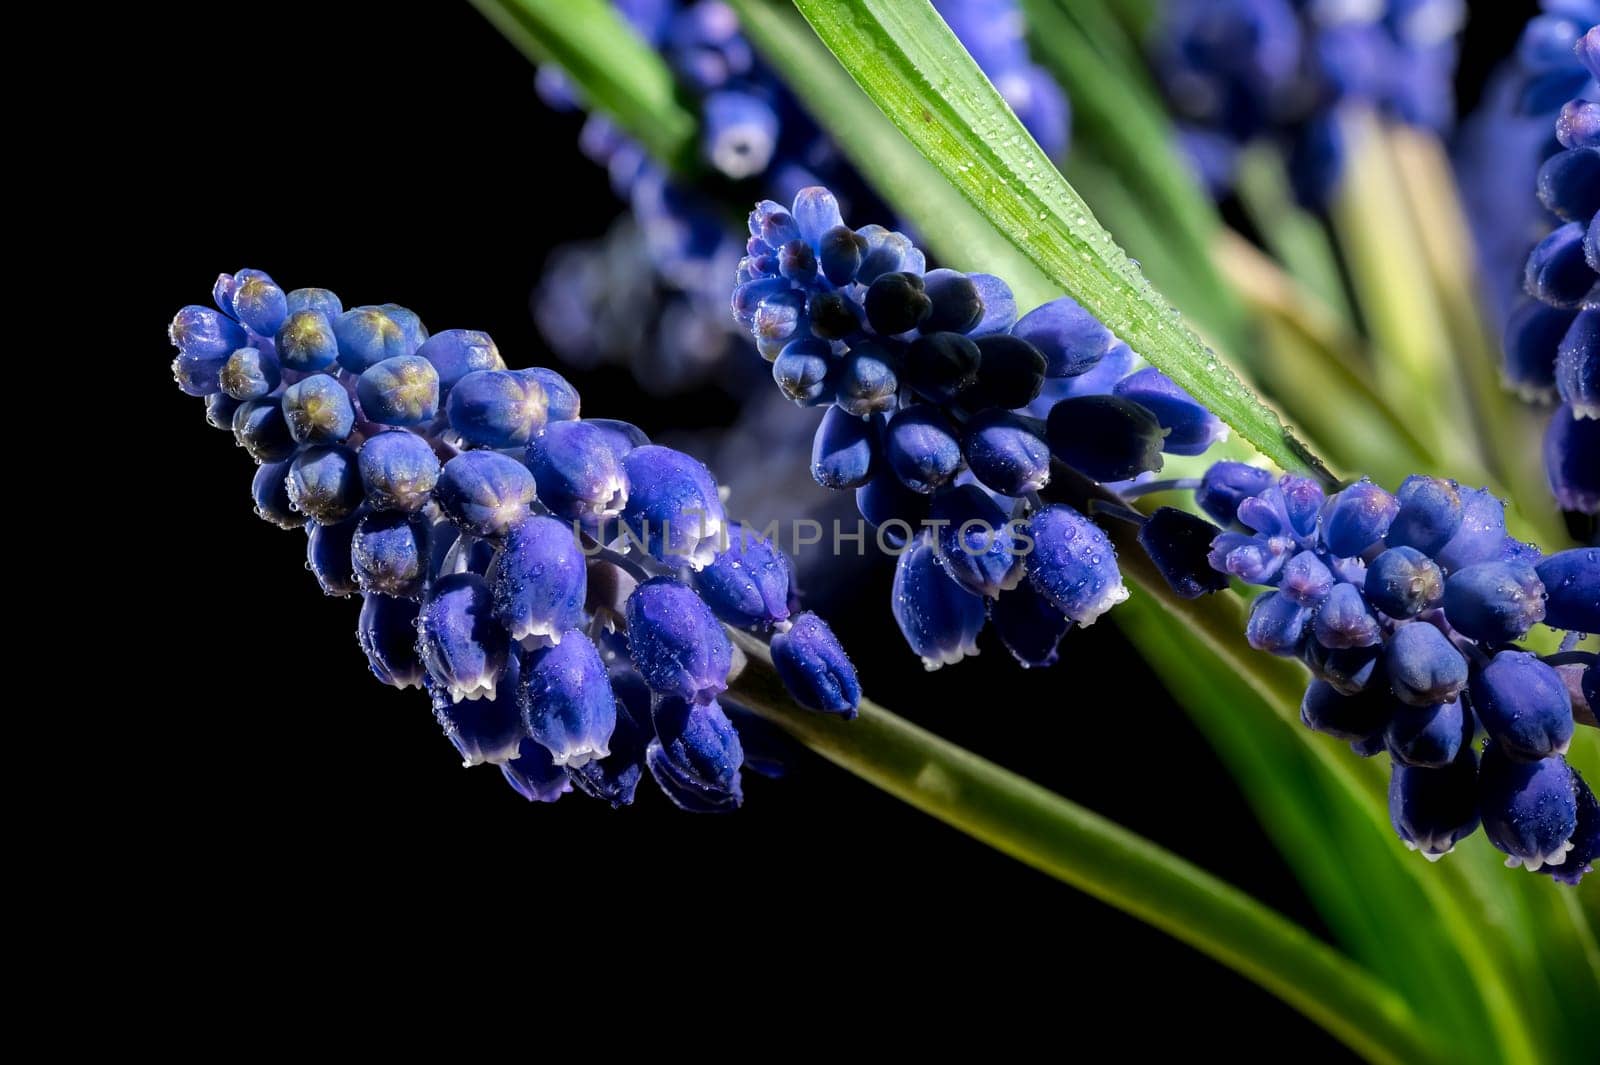 Blooming Muscari Alida flowers on a black background by Multipedia